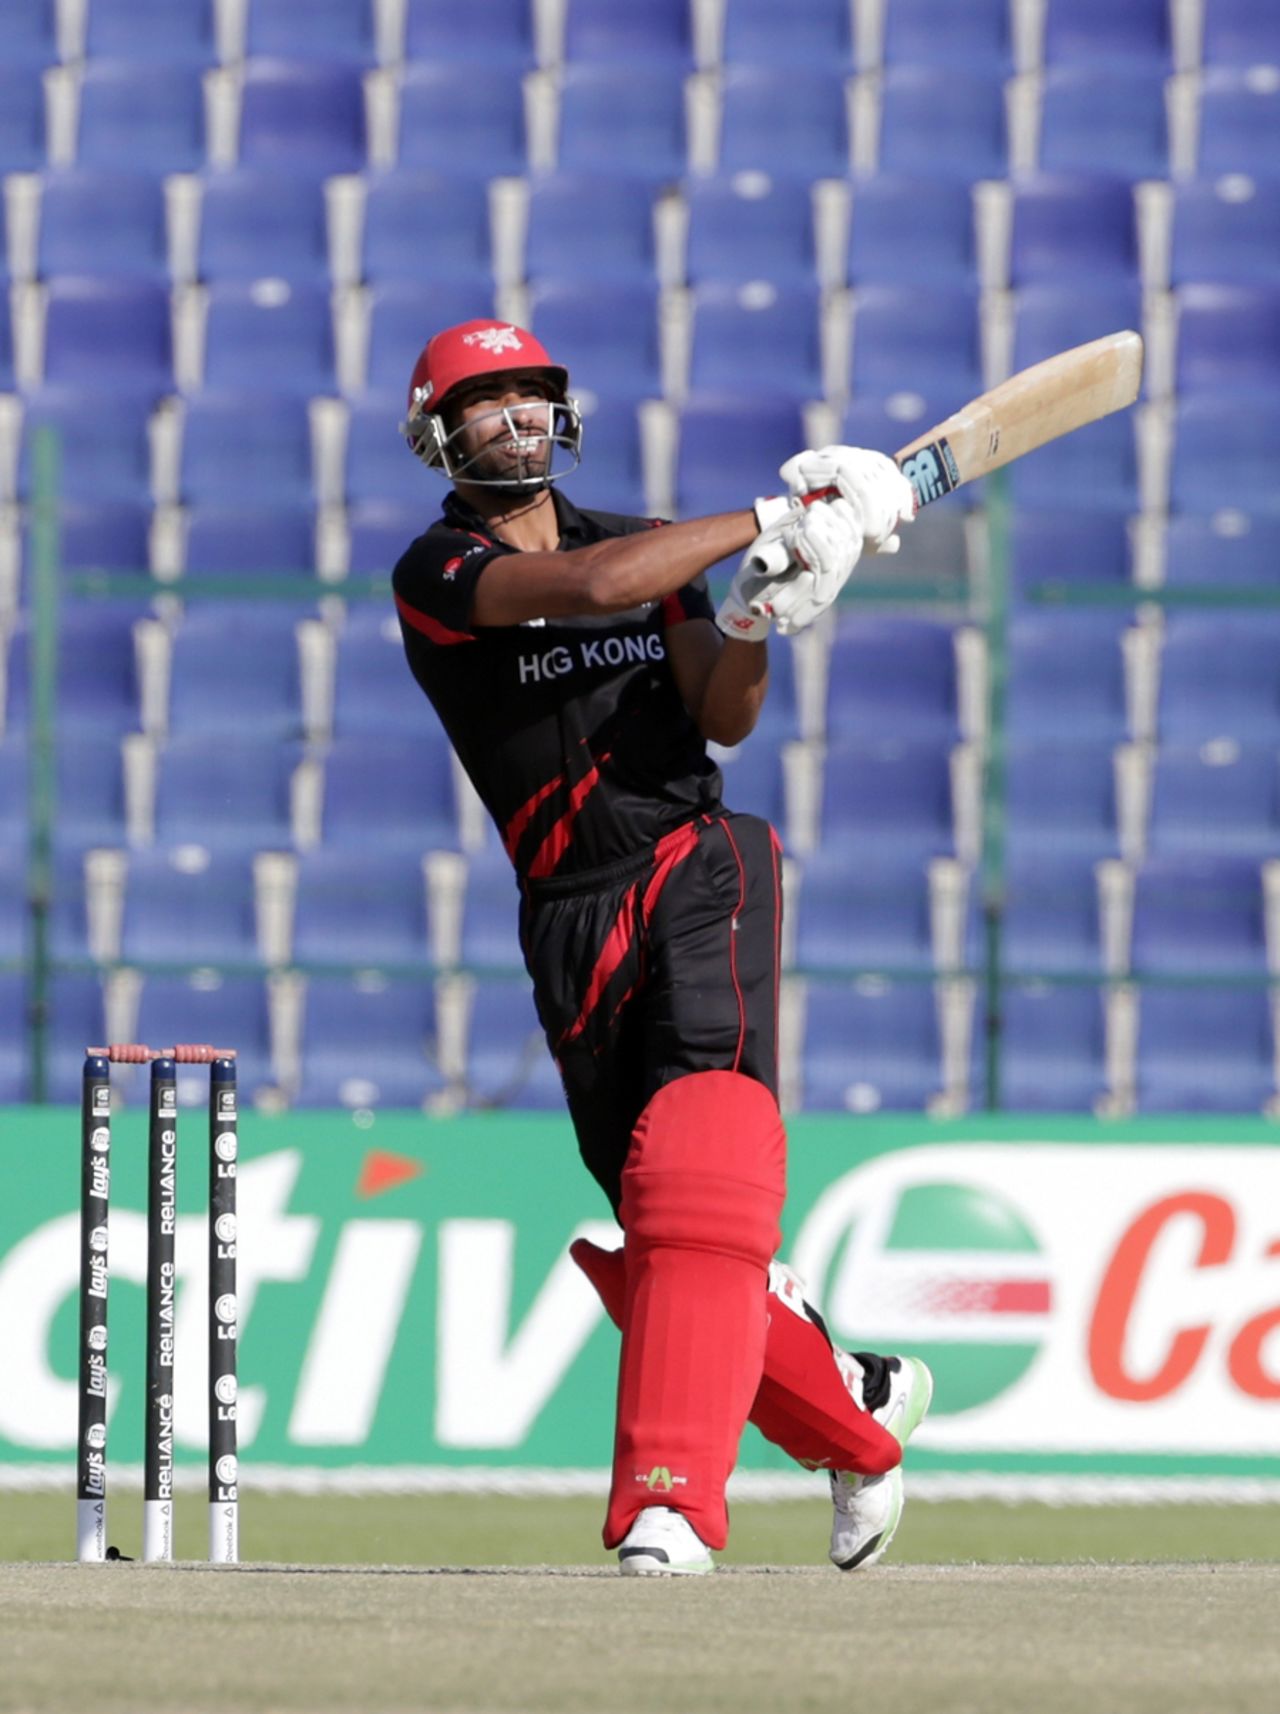 Irfan Ahmed of Hong Kong batting during the Papua New Guinea v Hong Kong Qualifying Play-off match at the ICC World Twenty20 Qualifiers at the Zayed Cricket Stadium on November 28, 2013 in Abu Dhabi, United Arab Emirates. (Photo by Graham Crouch-IDI/IDI via Getty Images)